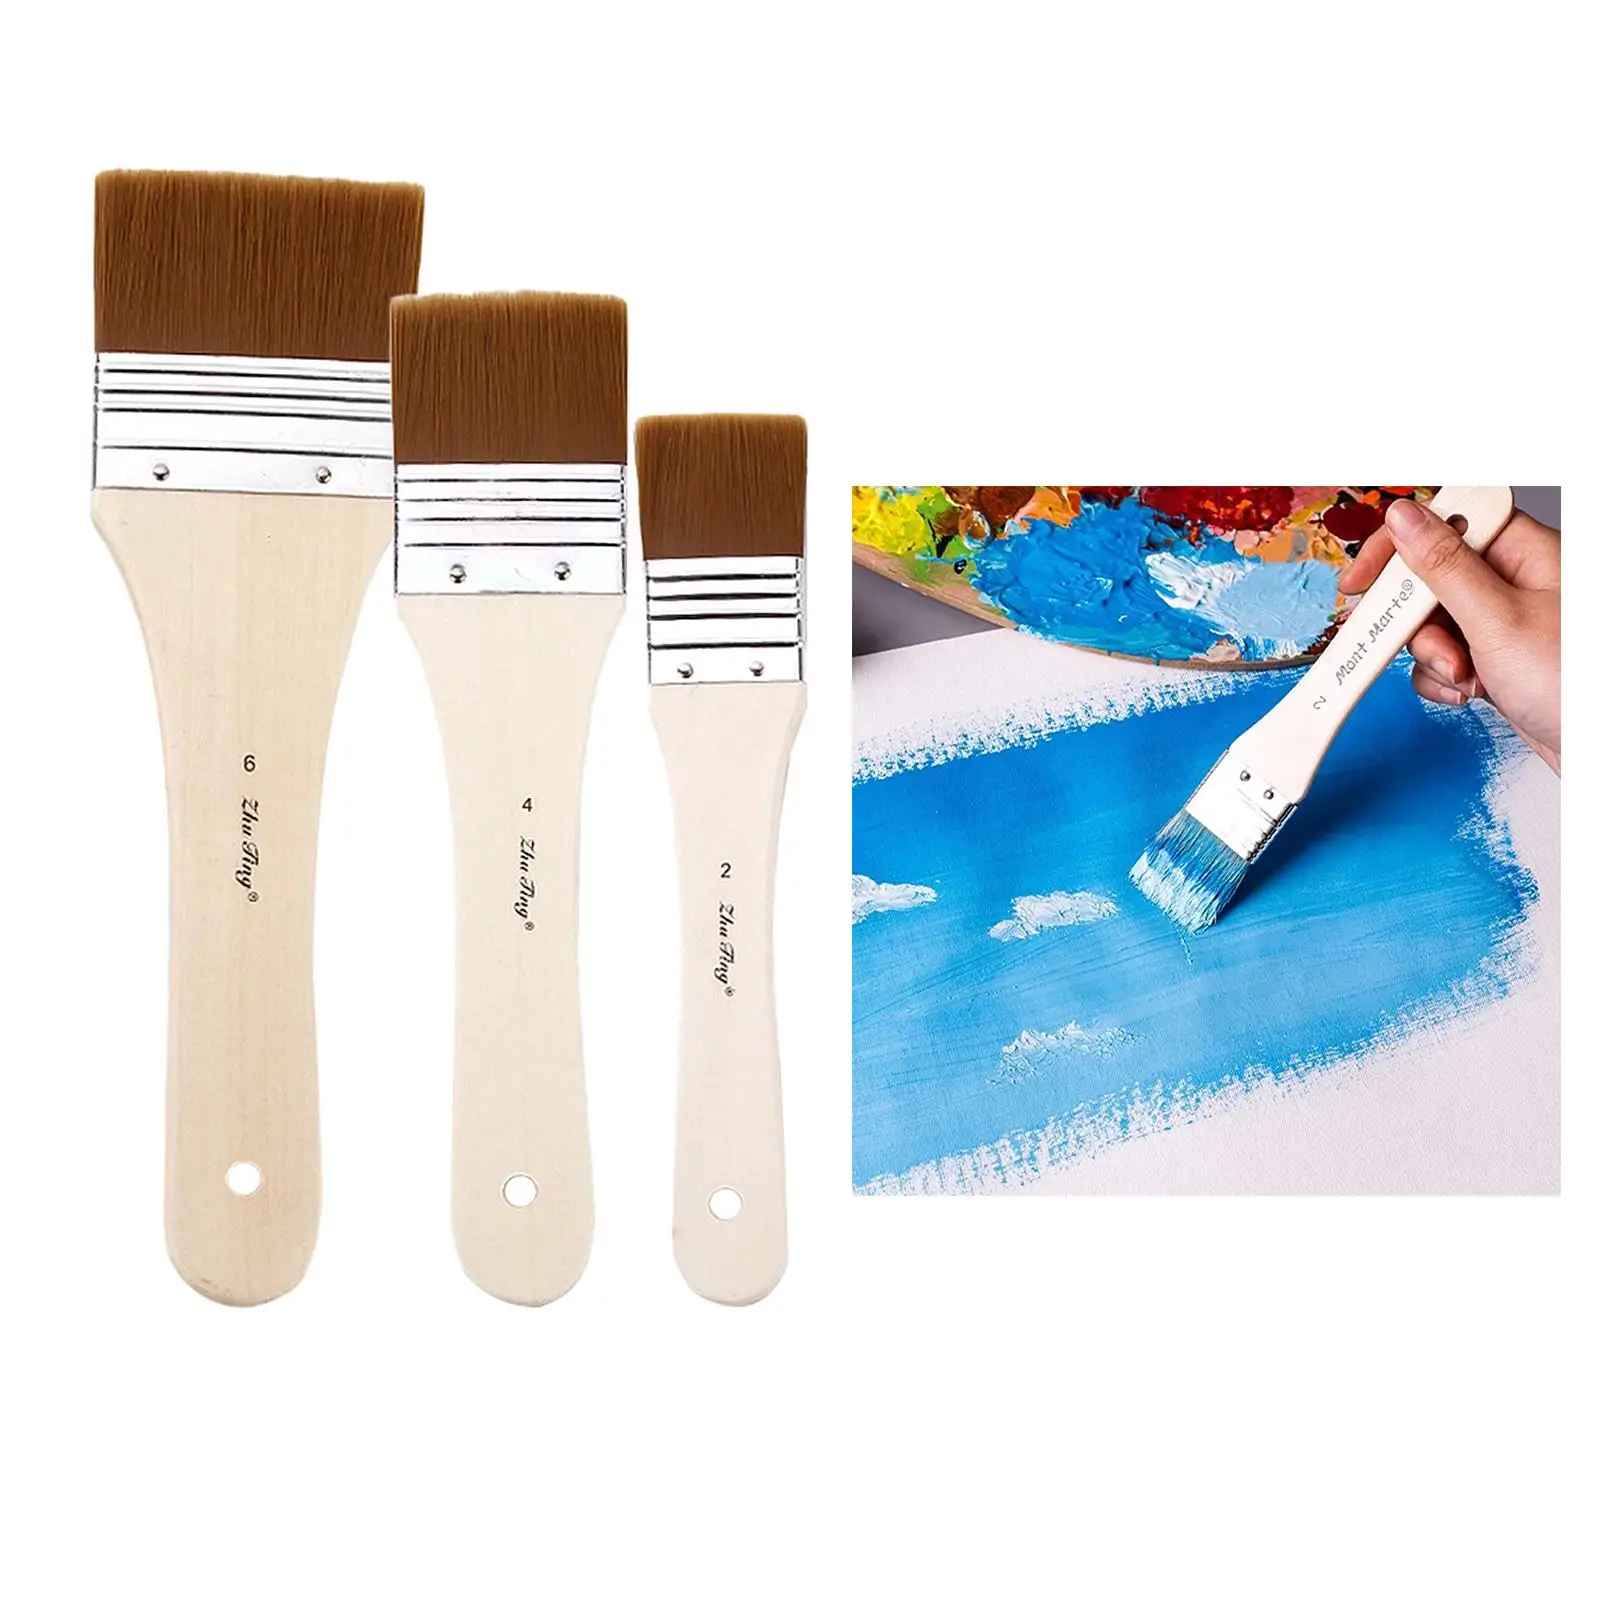 3x Paint Brushes, Wood Handle, Paint Brushes Set, for Oil Painting, Brush, Washable and Reusable